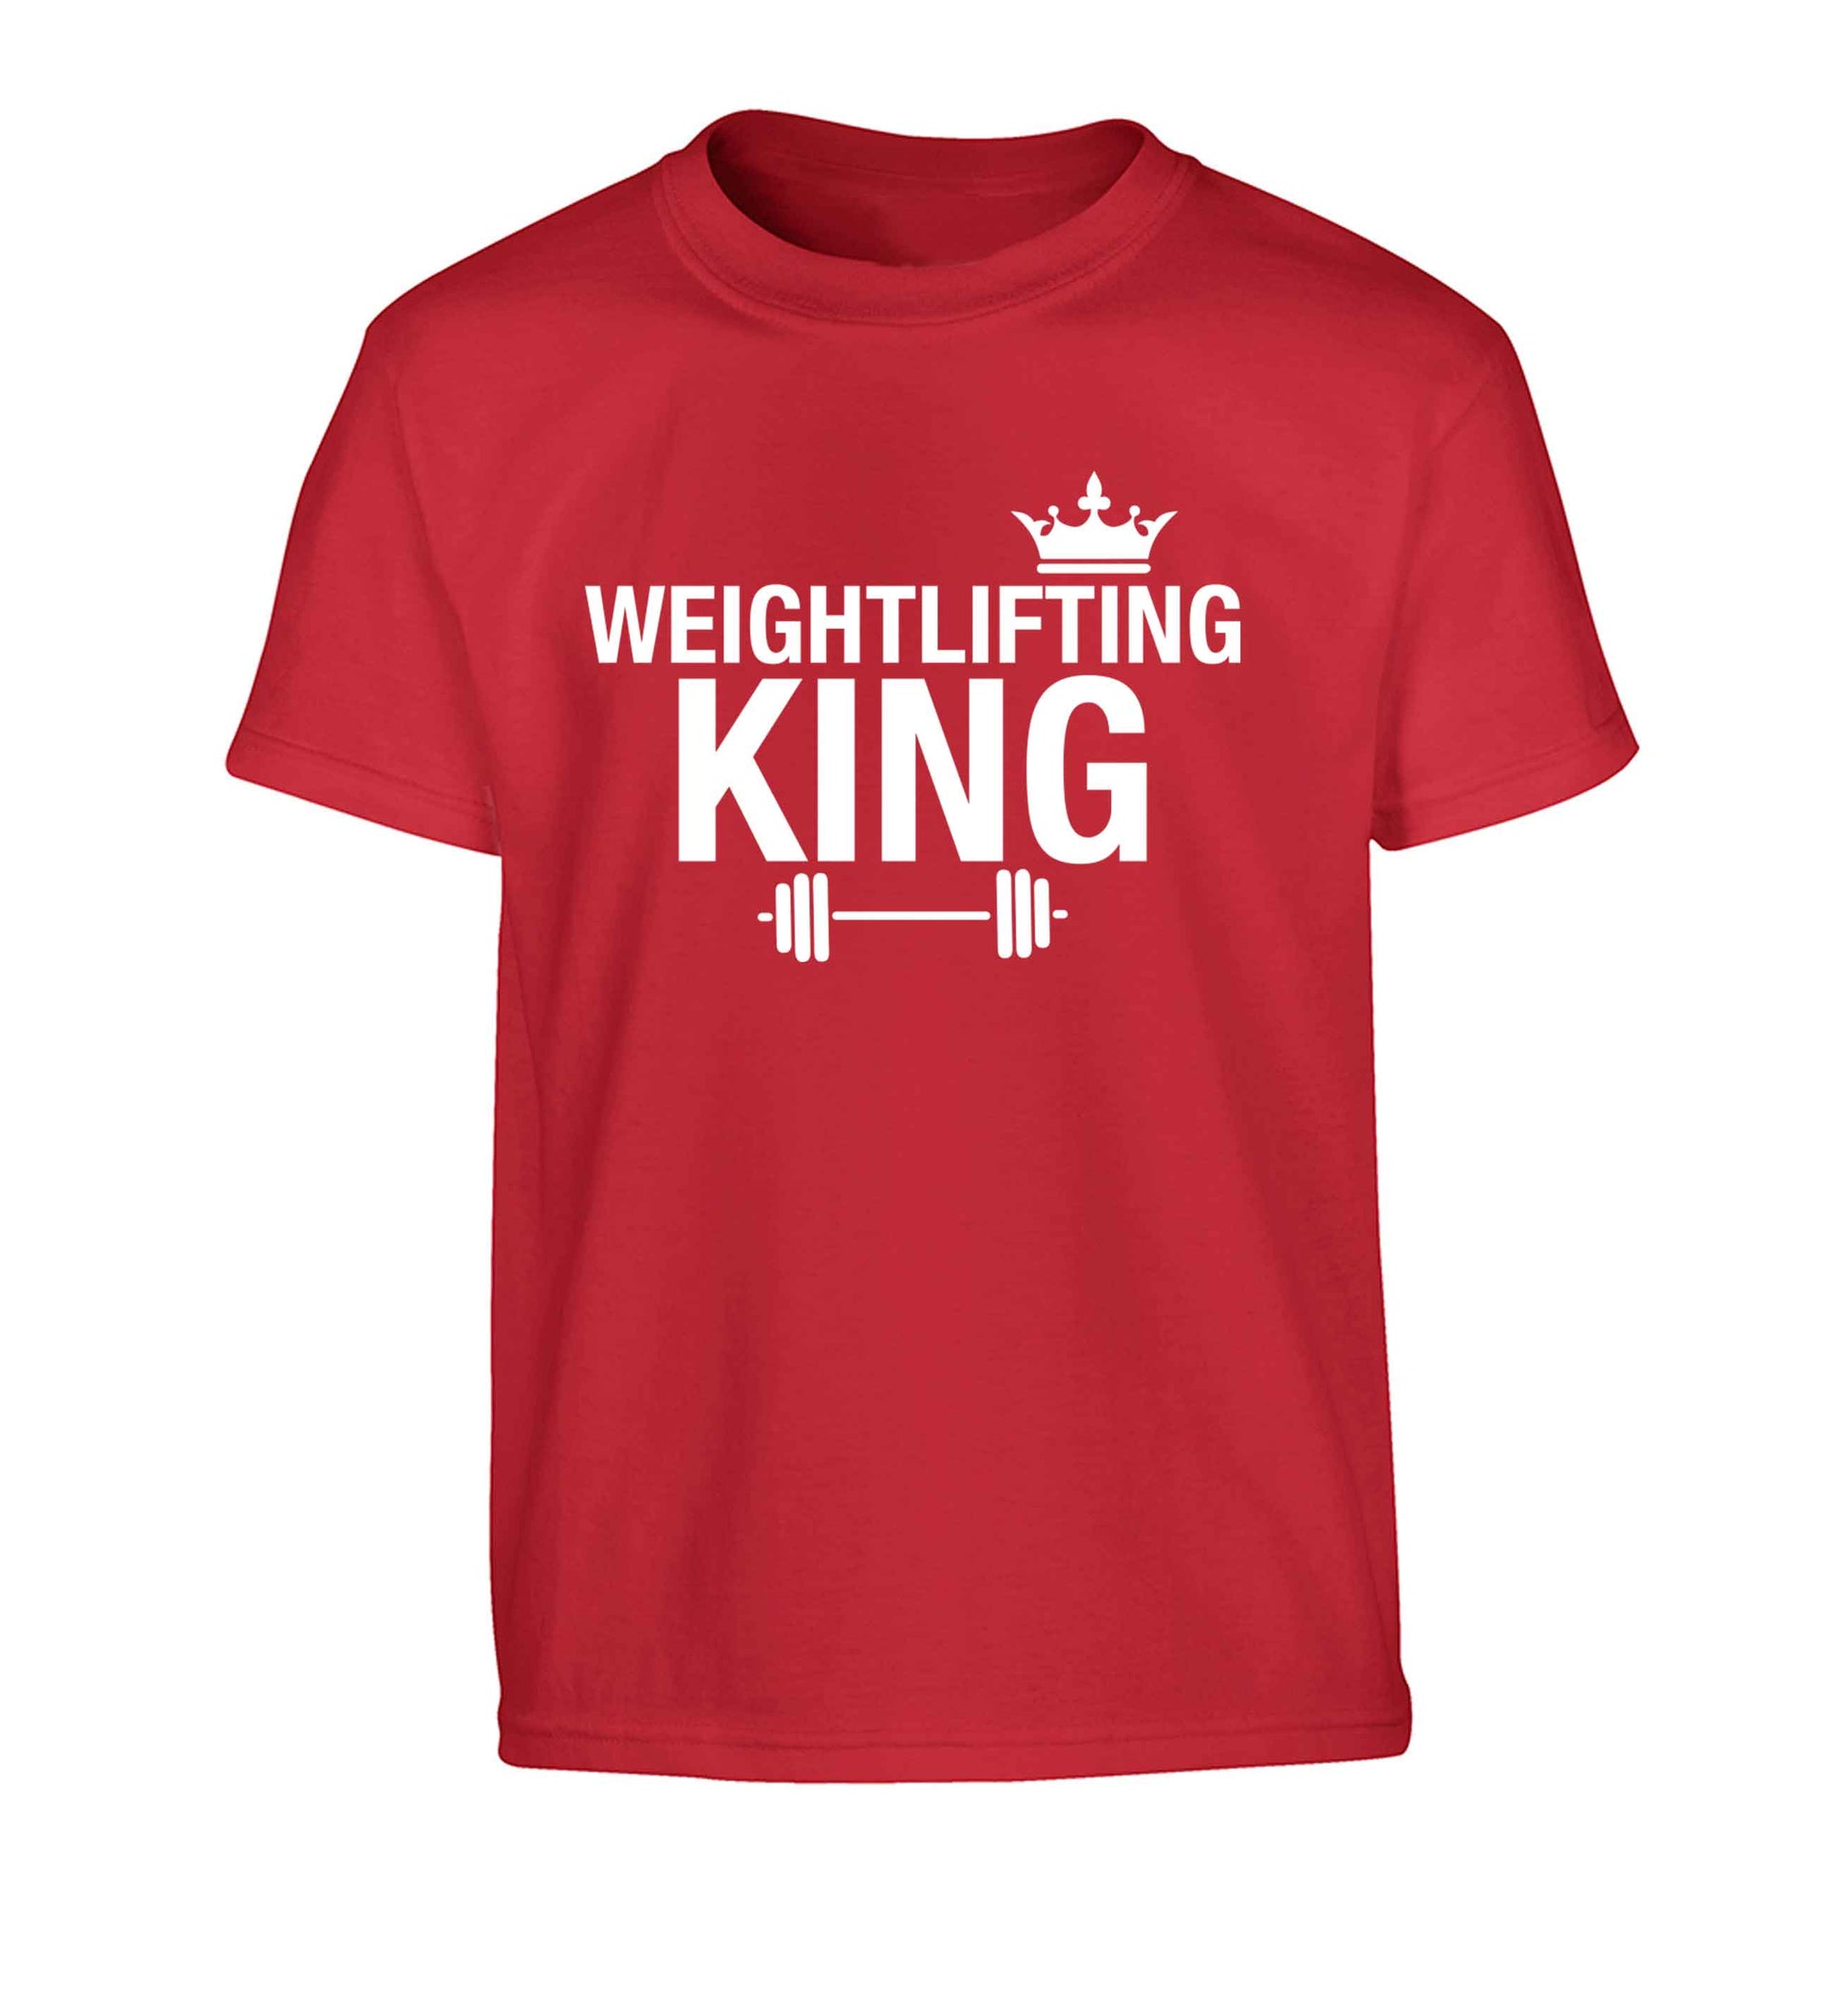 Weightlifting king Children's red Tshirt 12-13 Years